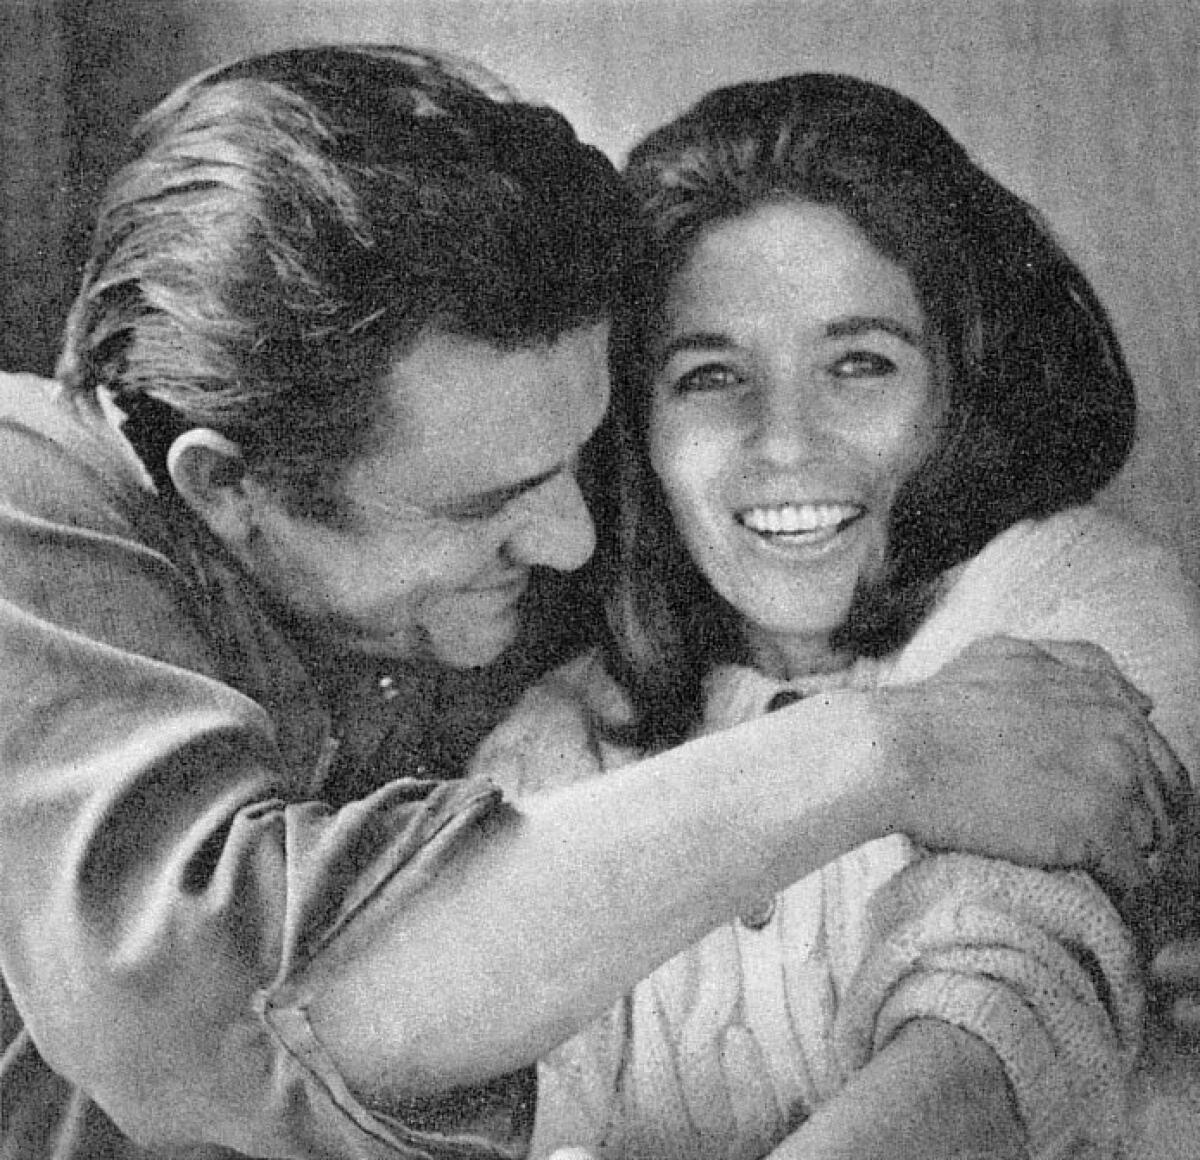 An archival photo of June Carter Cash and Johnny Cash.